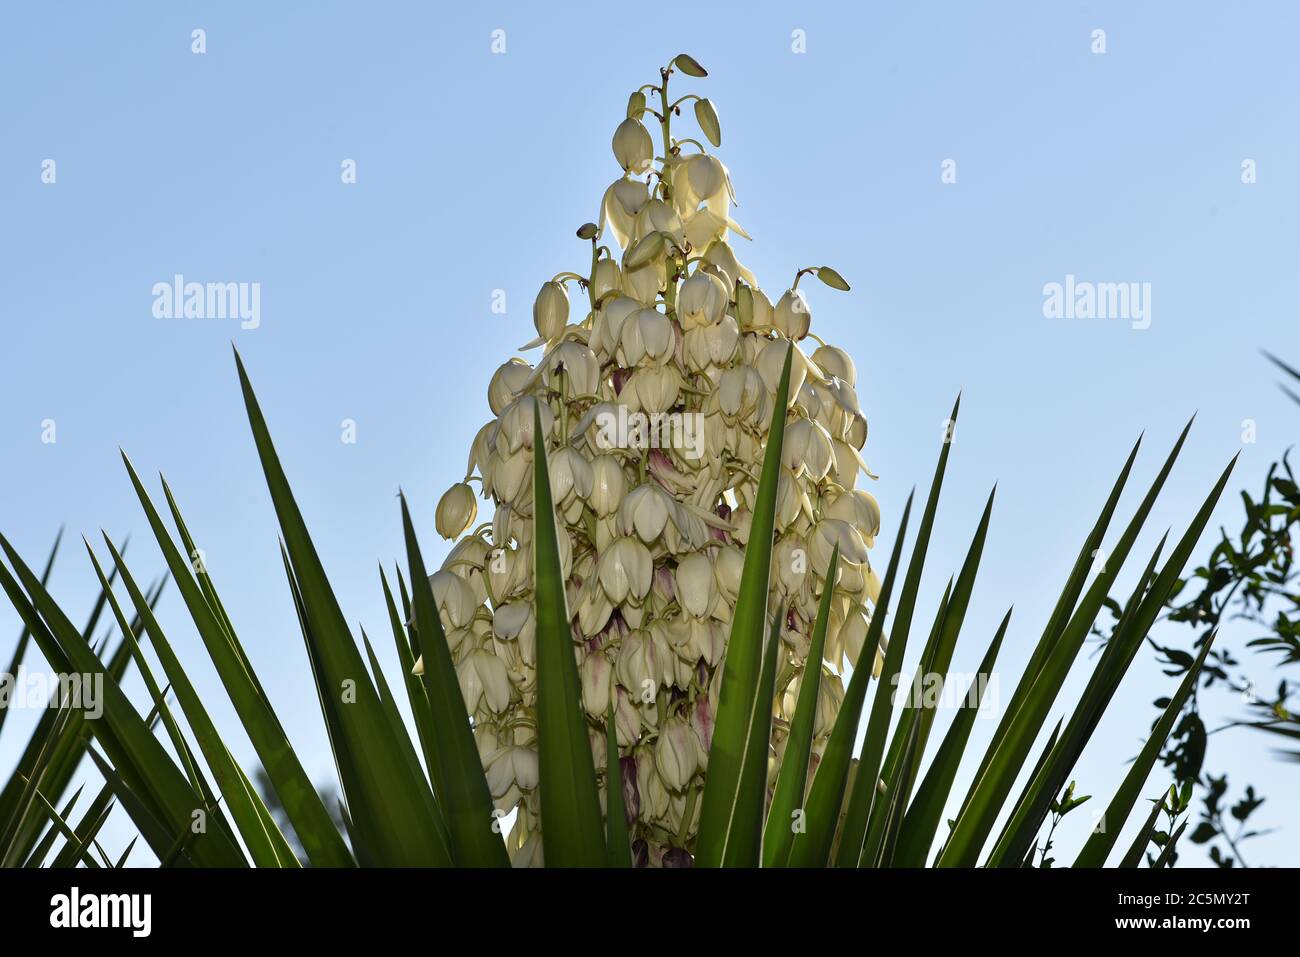 Yucca blooms a beautiful white flower. Stock Photo